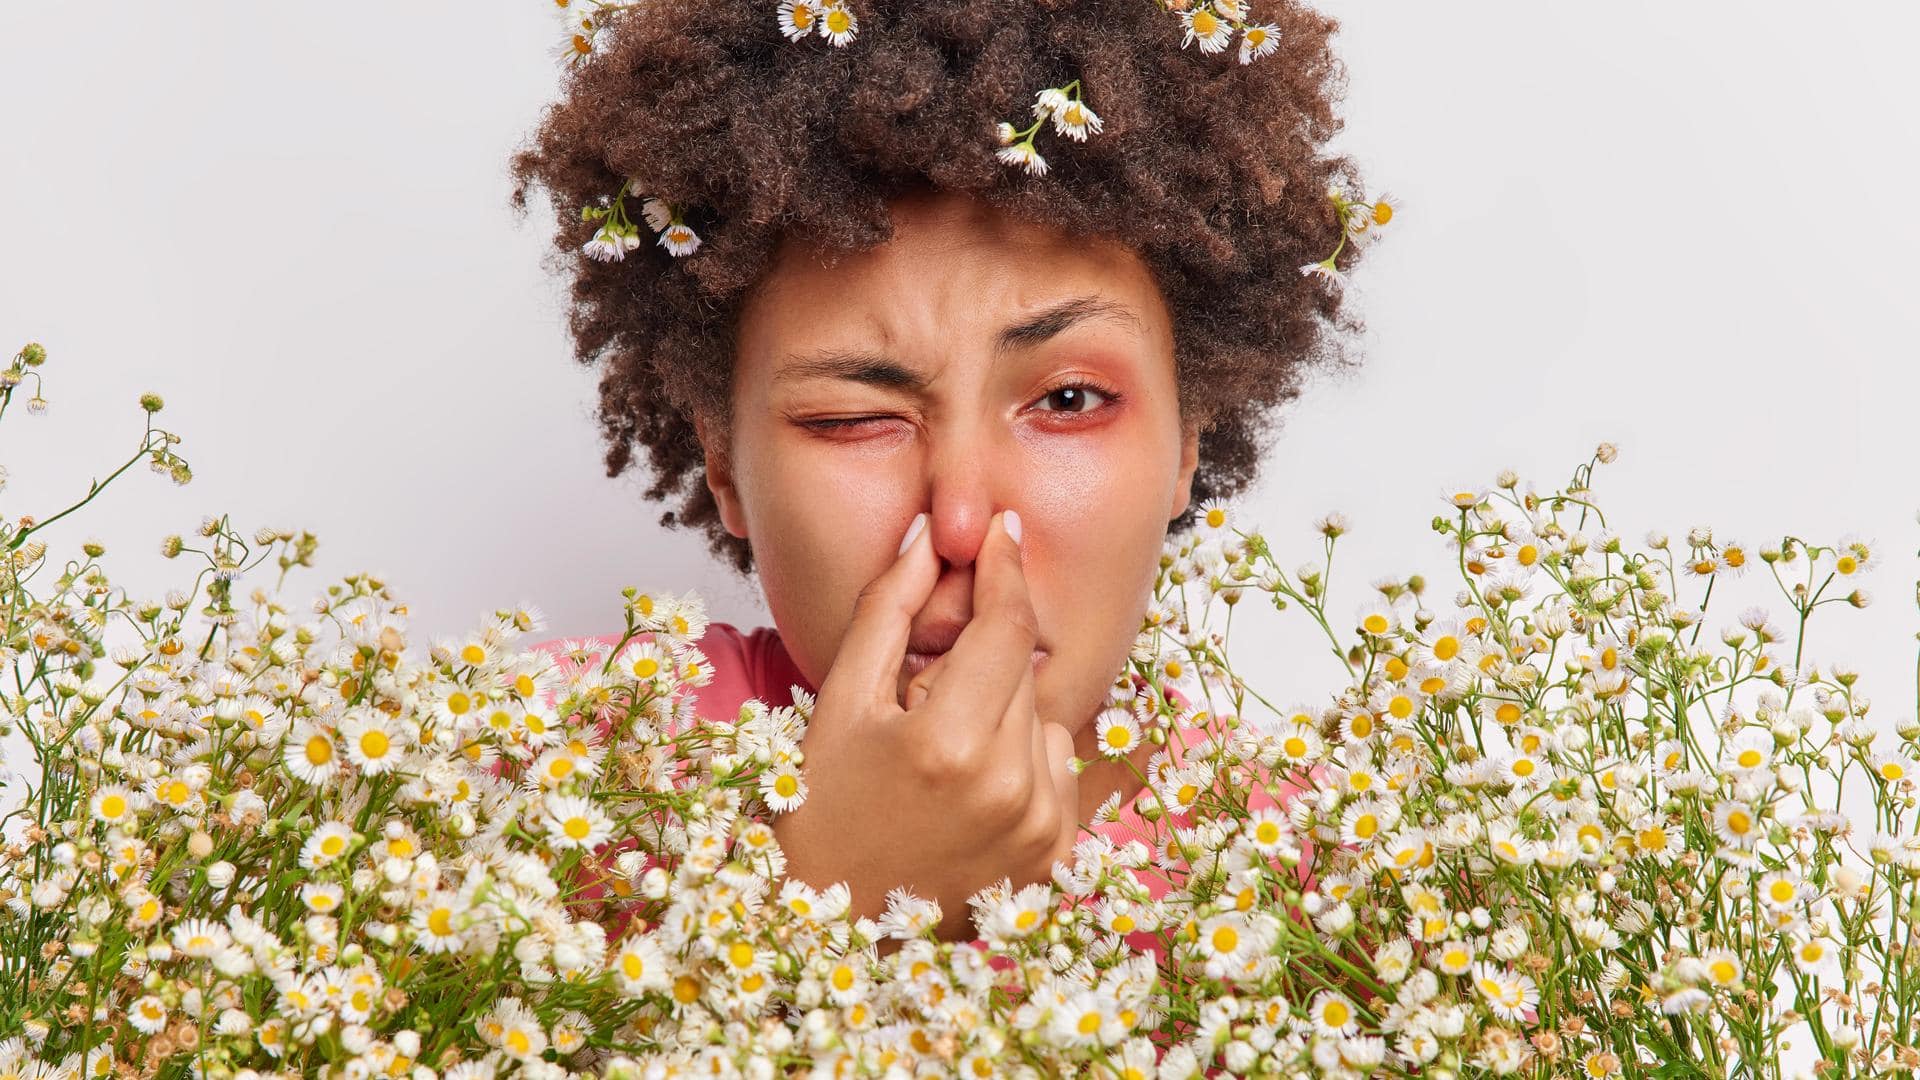 Pollen allergies: Meaning, causes, symptoms, and treatment